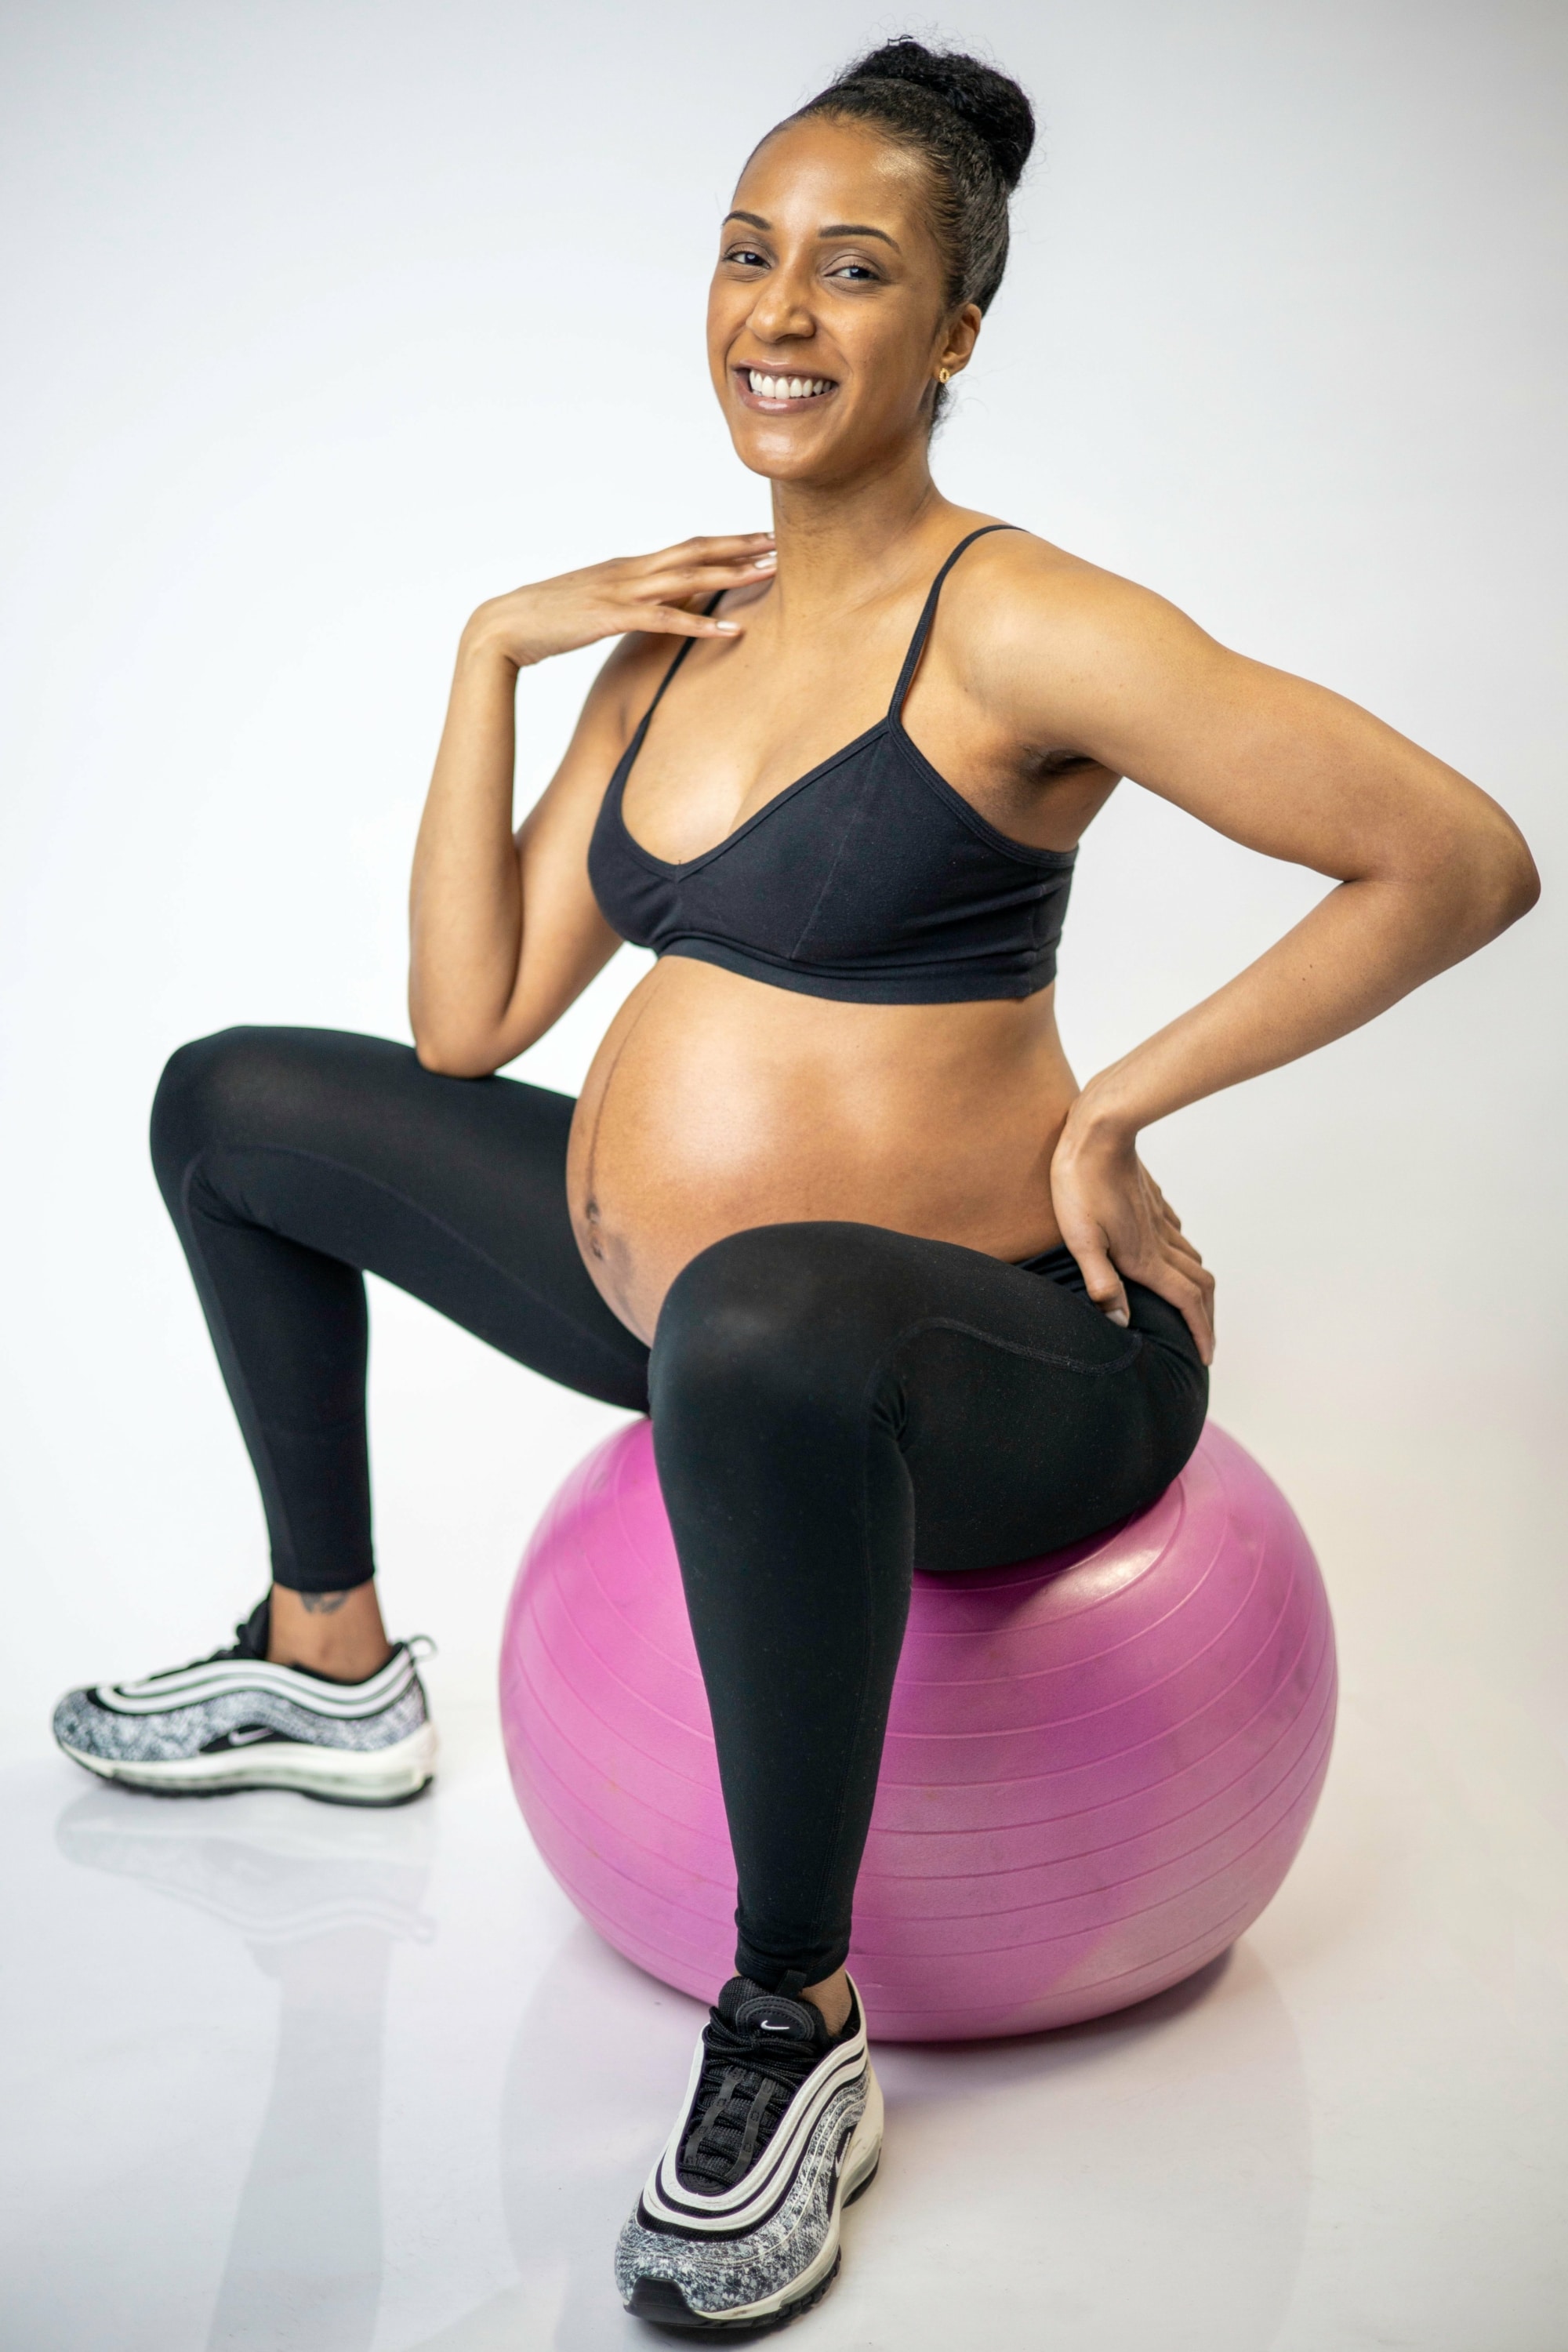 AFPA Graduate of the Month: Dr. Maria Banks, Prenatal and Postpartum Fitness Specialist